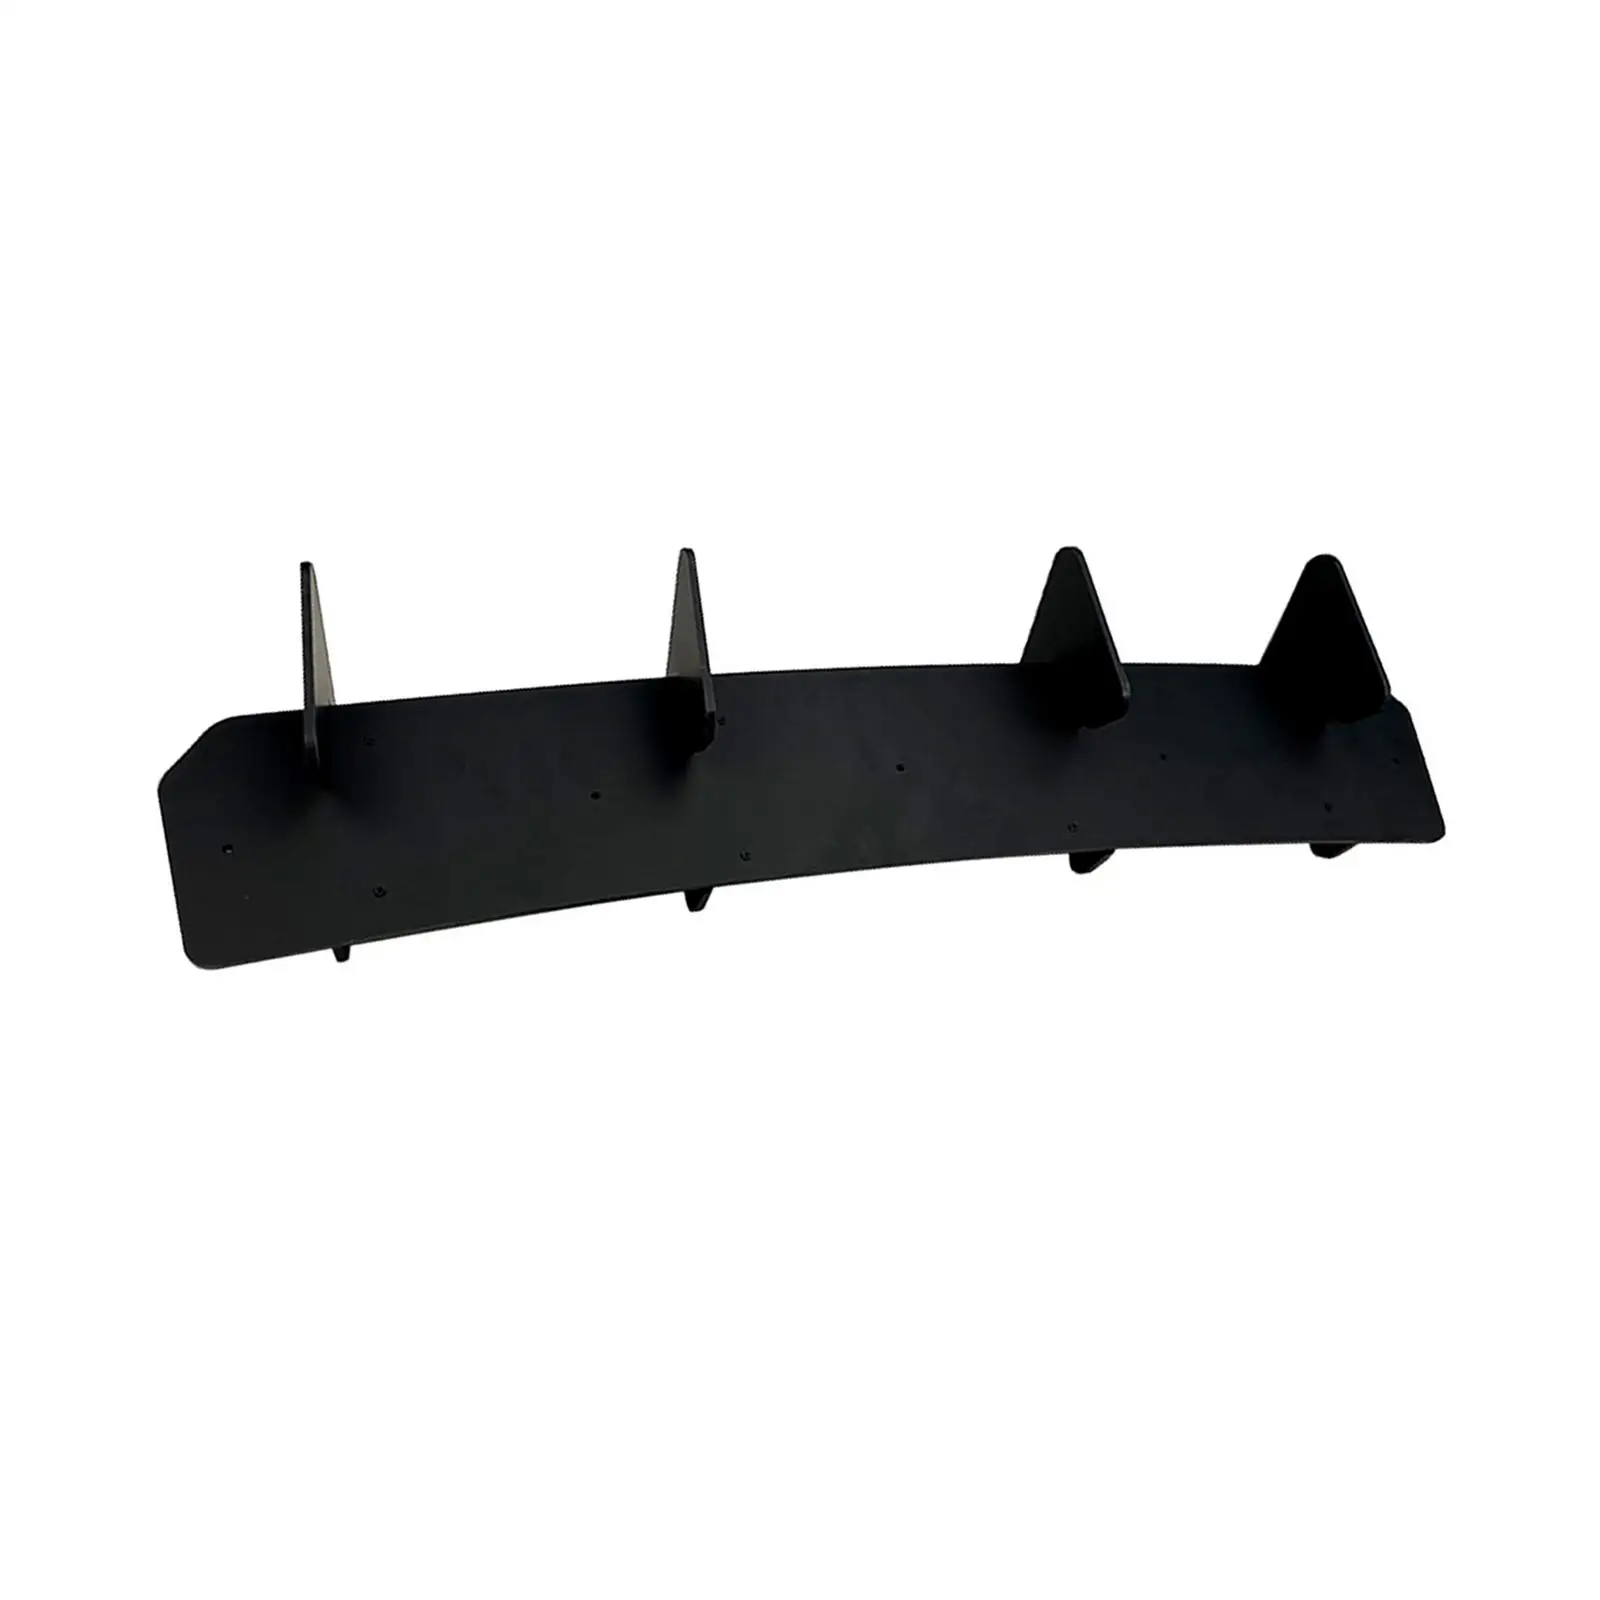 Automotive Rear Bumper Diffuser Spoiler with Side splitters for VW Golf MK7.5 GTI Professional ABS Material Accessory